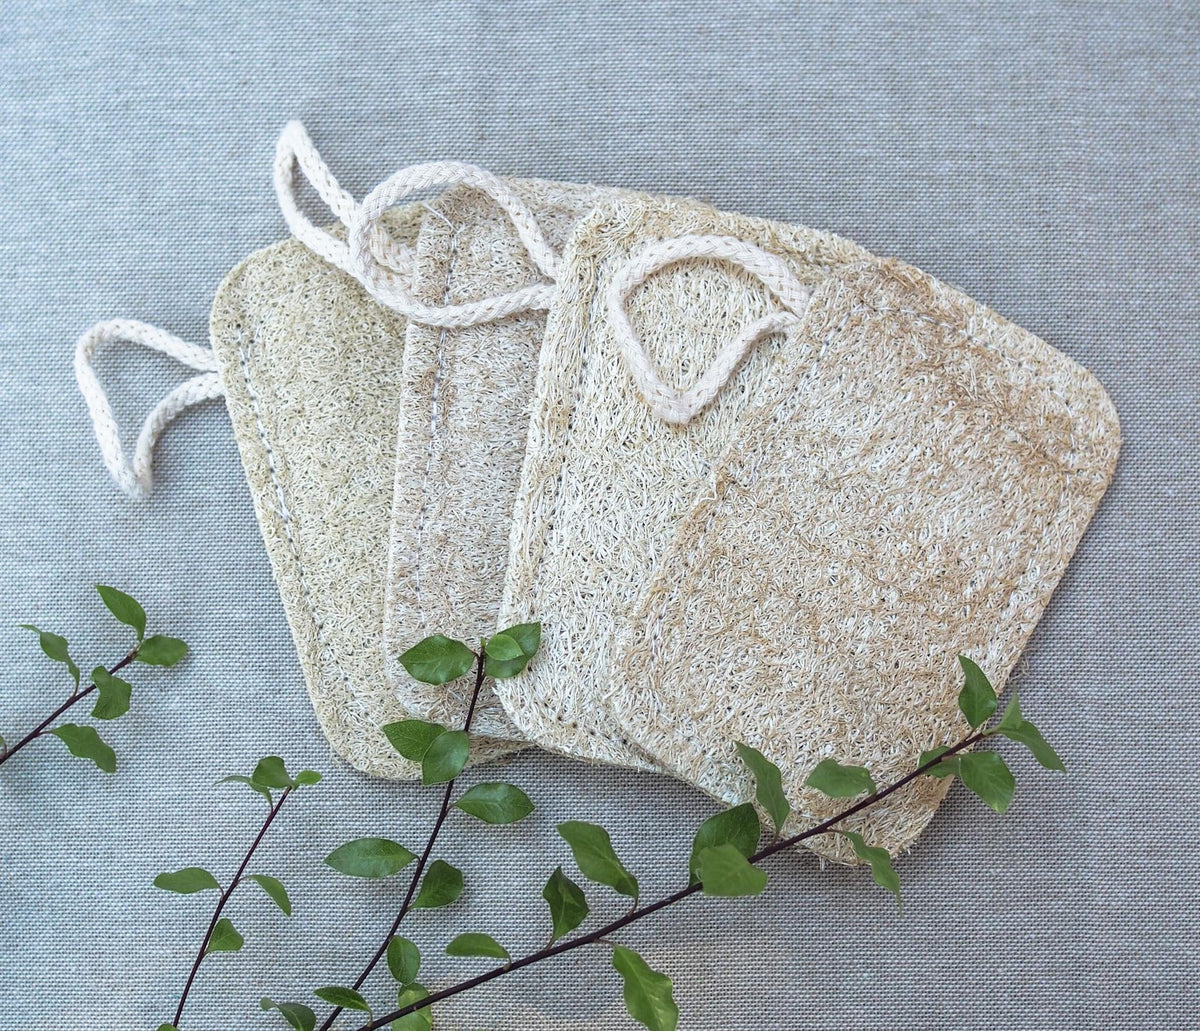 Brush It OnBrush It On Compostable Kitchen Loofah: 2 Pack #same day gift delivery melbourne#